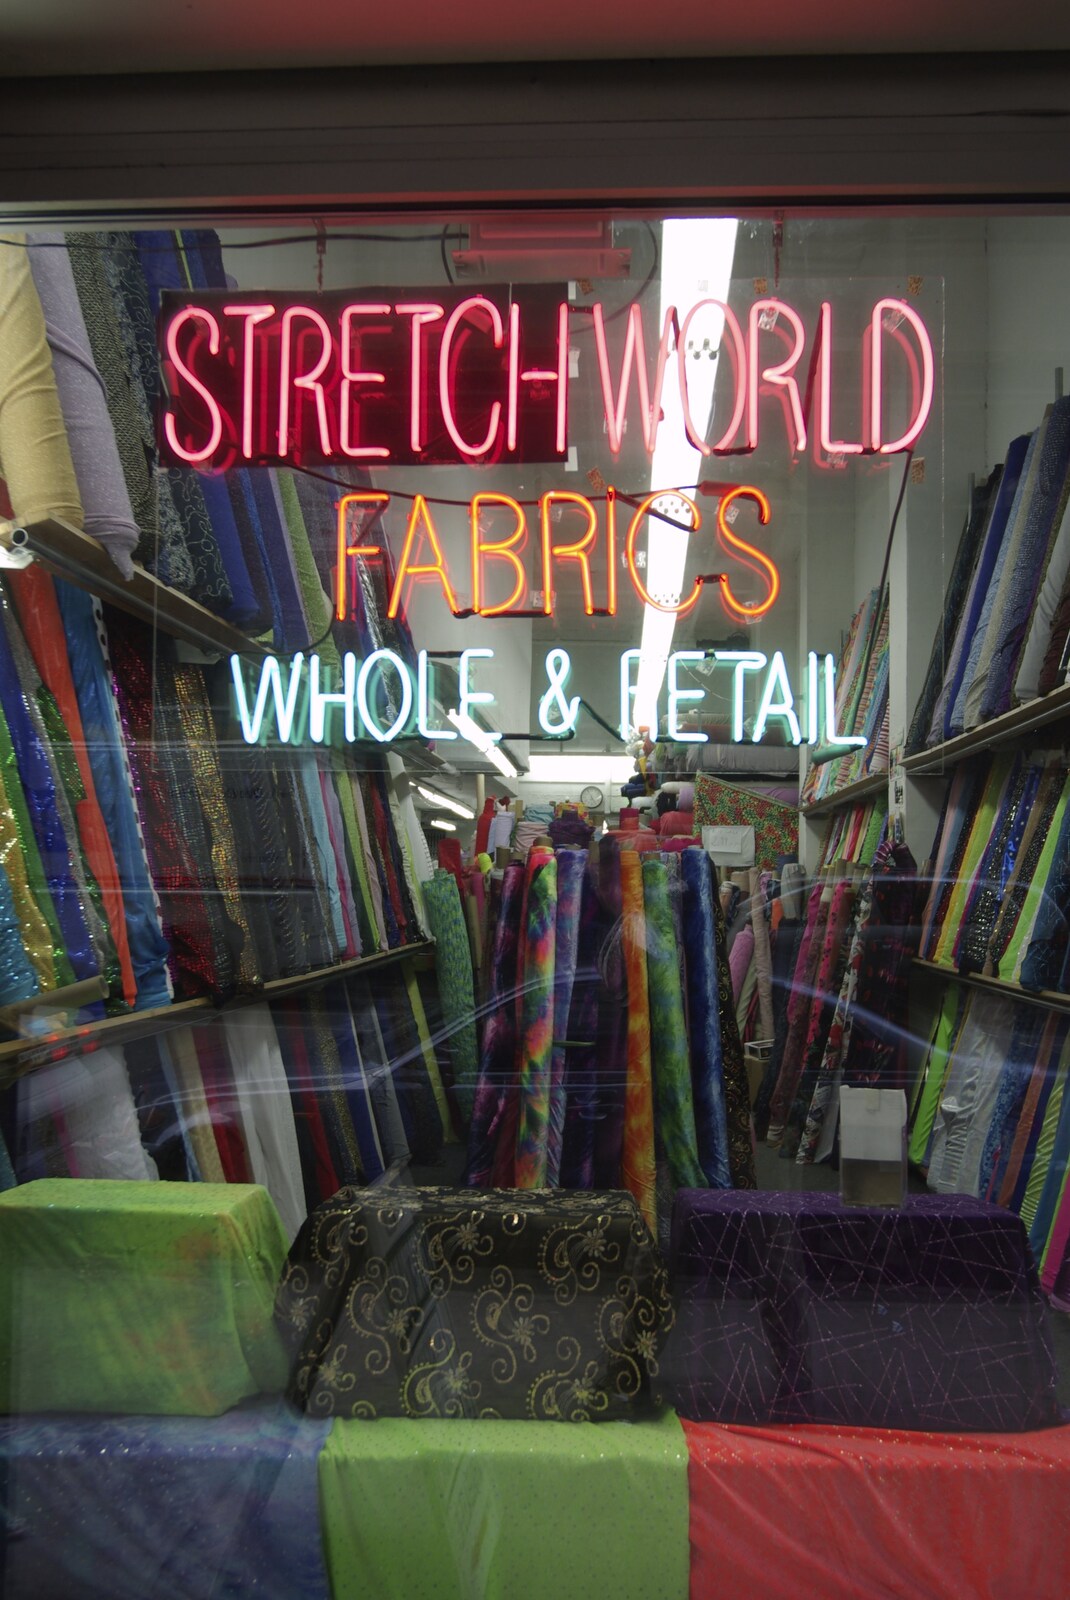 Persian Day Parade, Upper East Side and Midtown, New York, US - 25th March 2007: Stretchworld Fabrics neon